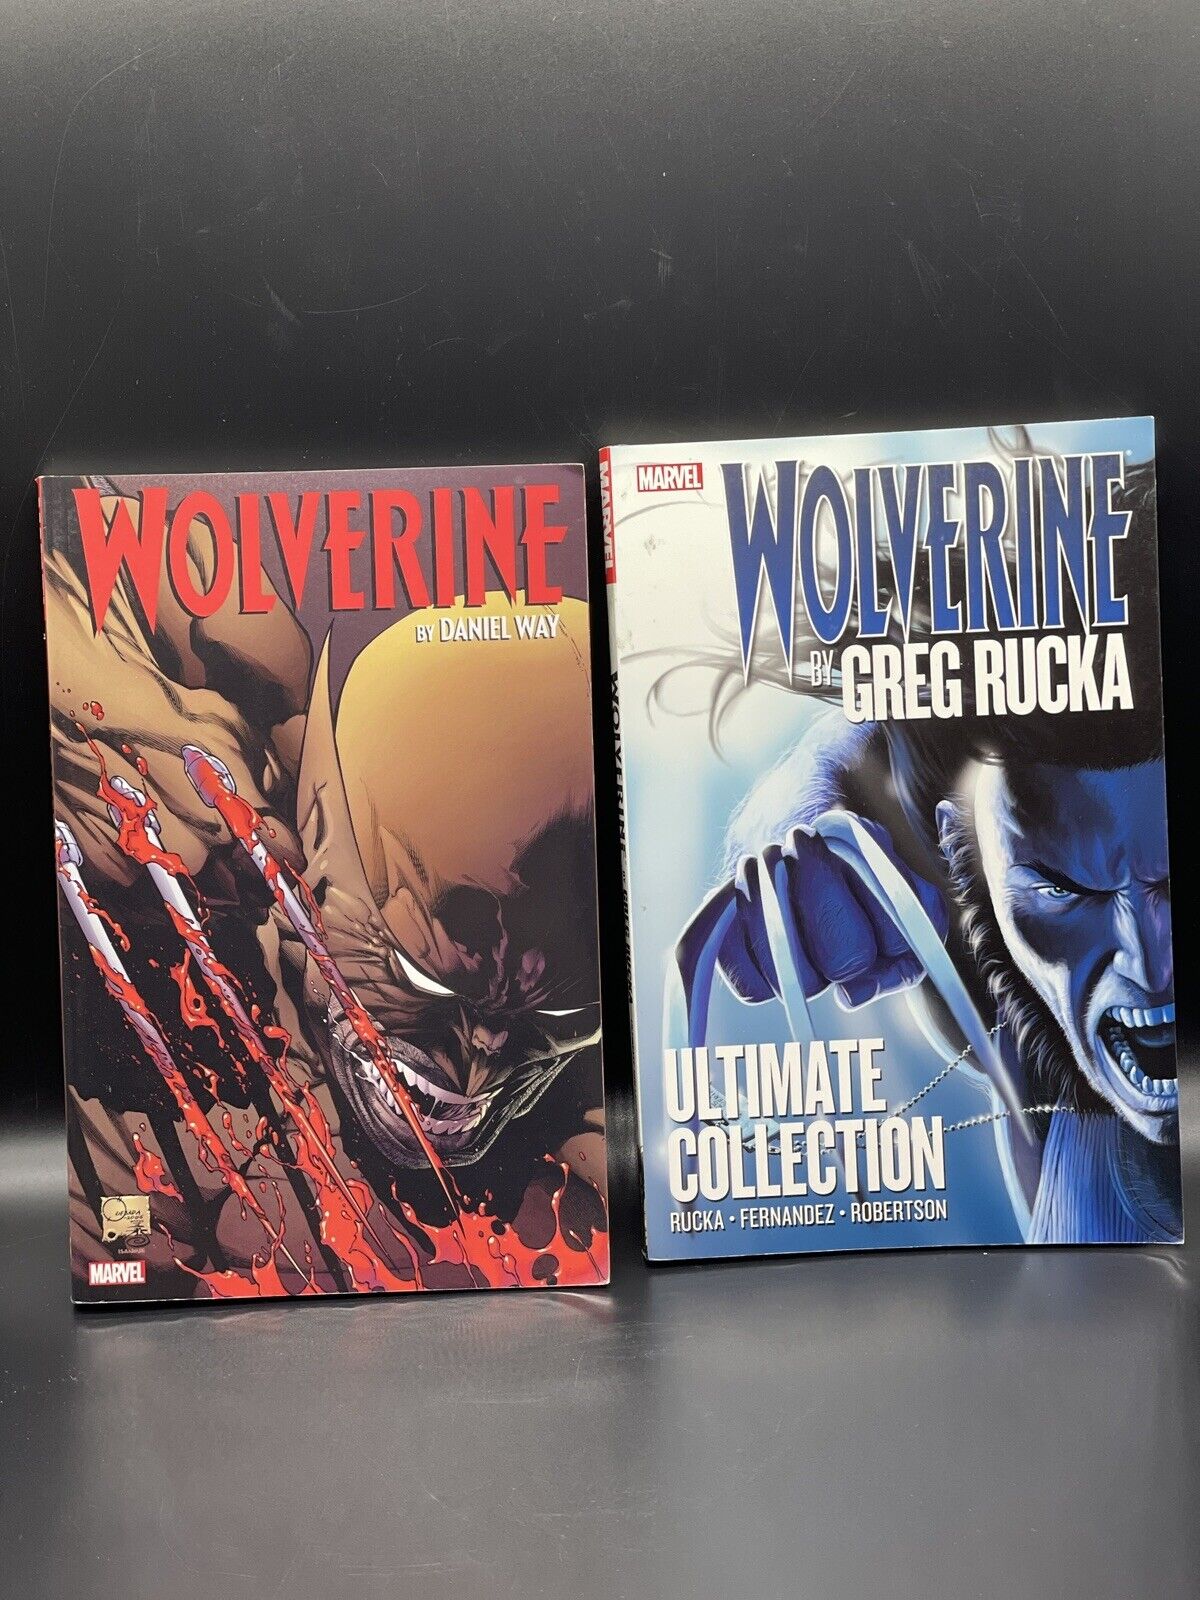 Wolverine by Greg Rucka Ultimate Collection Marvel And Wolverine by Daniel Way.